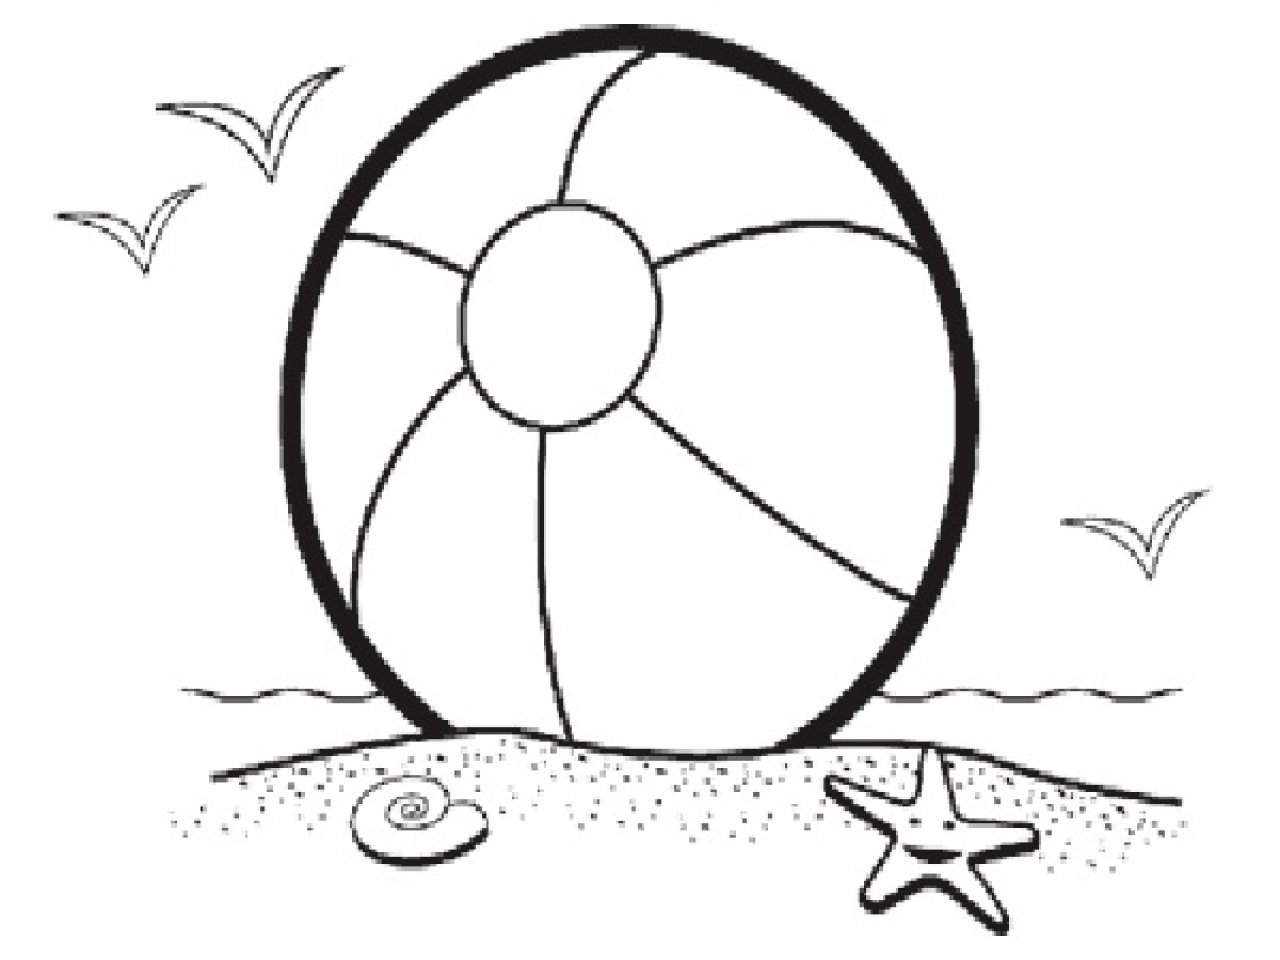 beach-ball-coloring-page-at-getcolorings-free-printable-colorings-pages-to-print-and-color